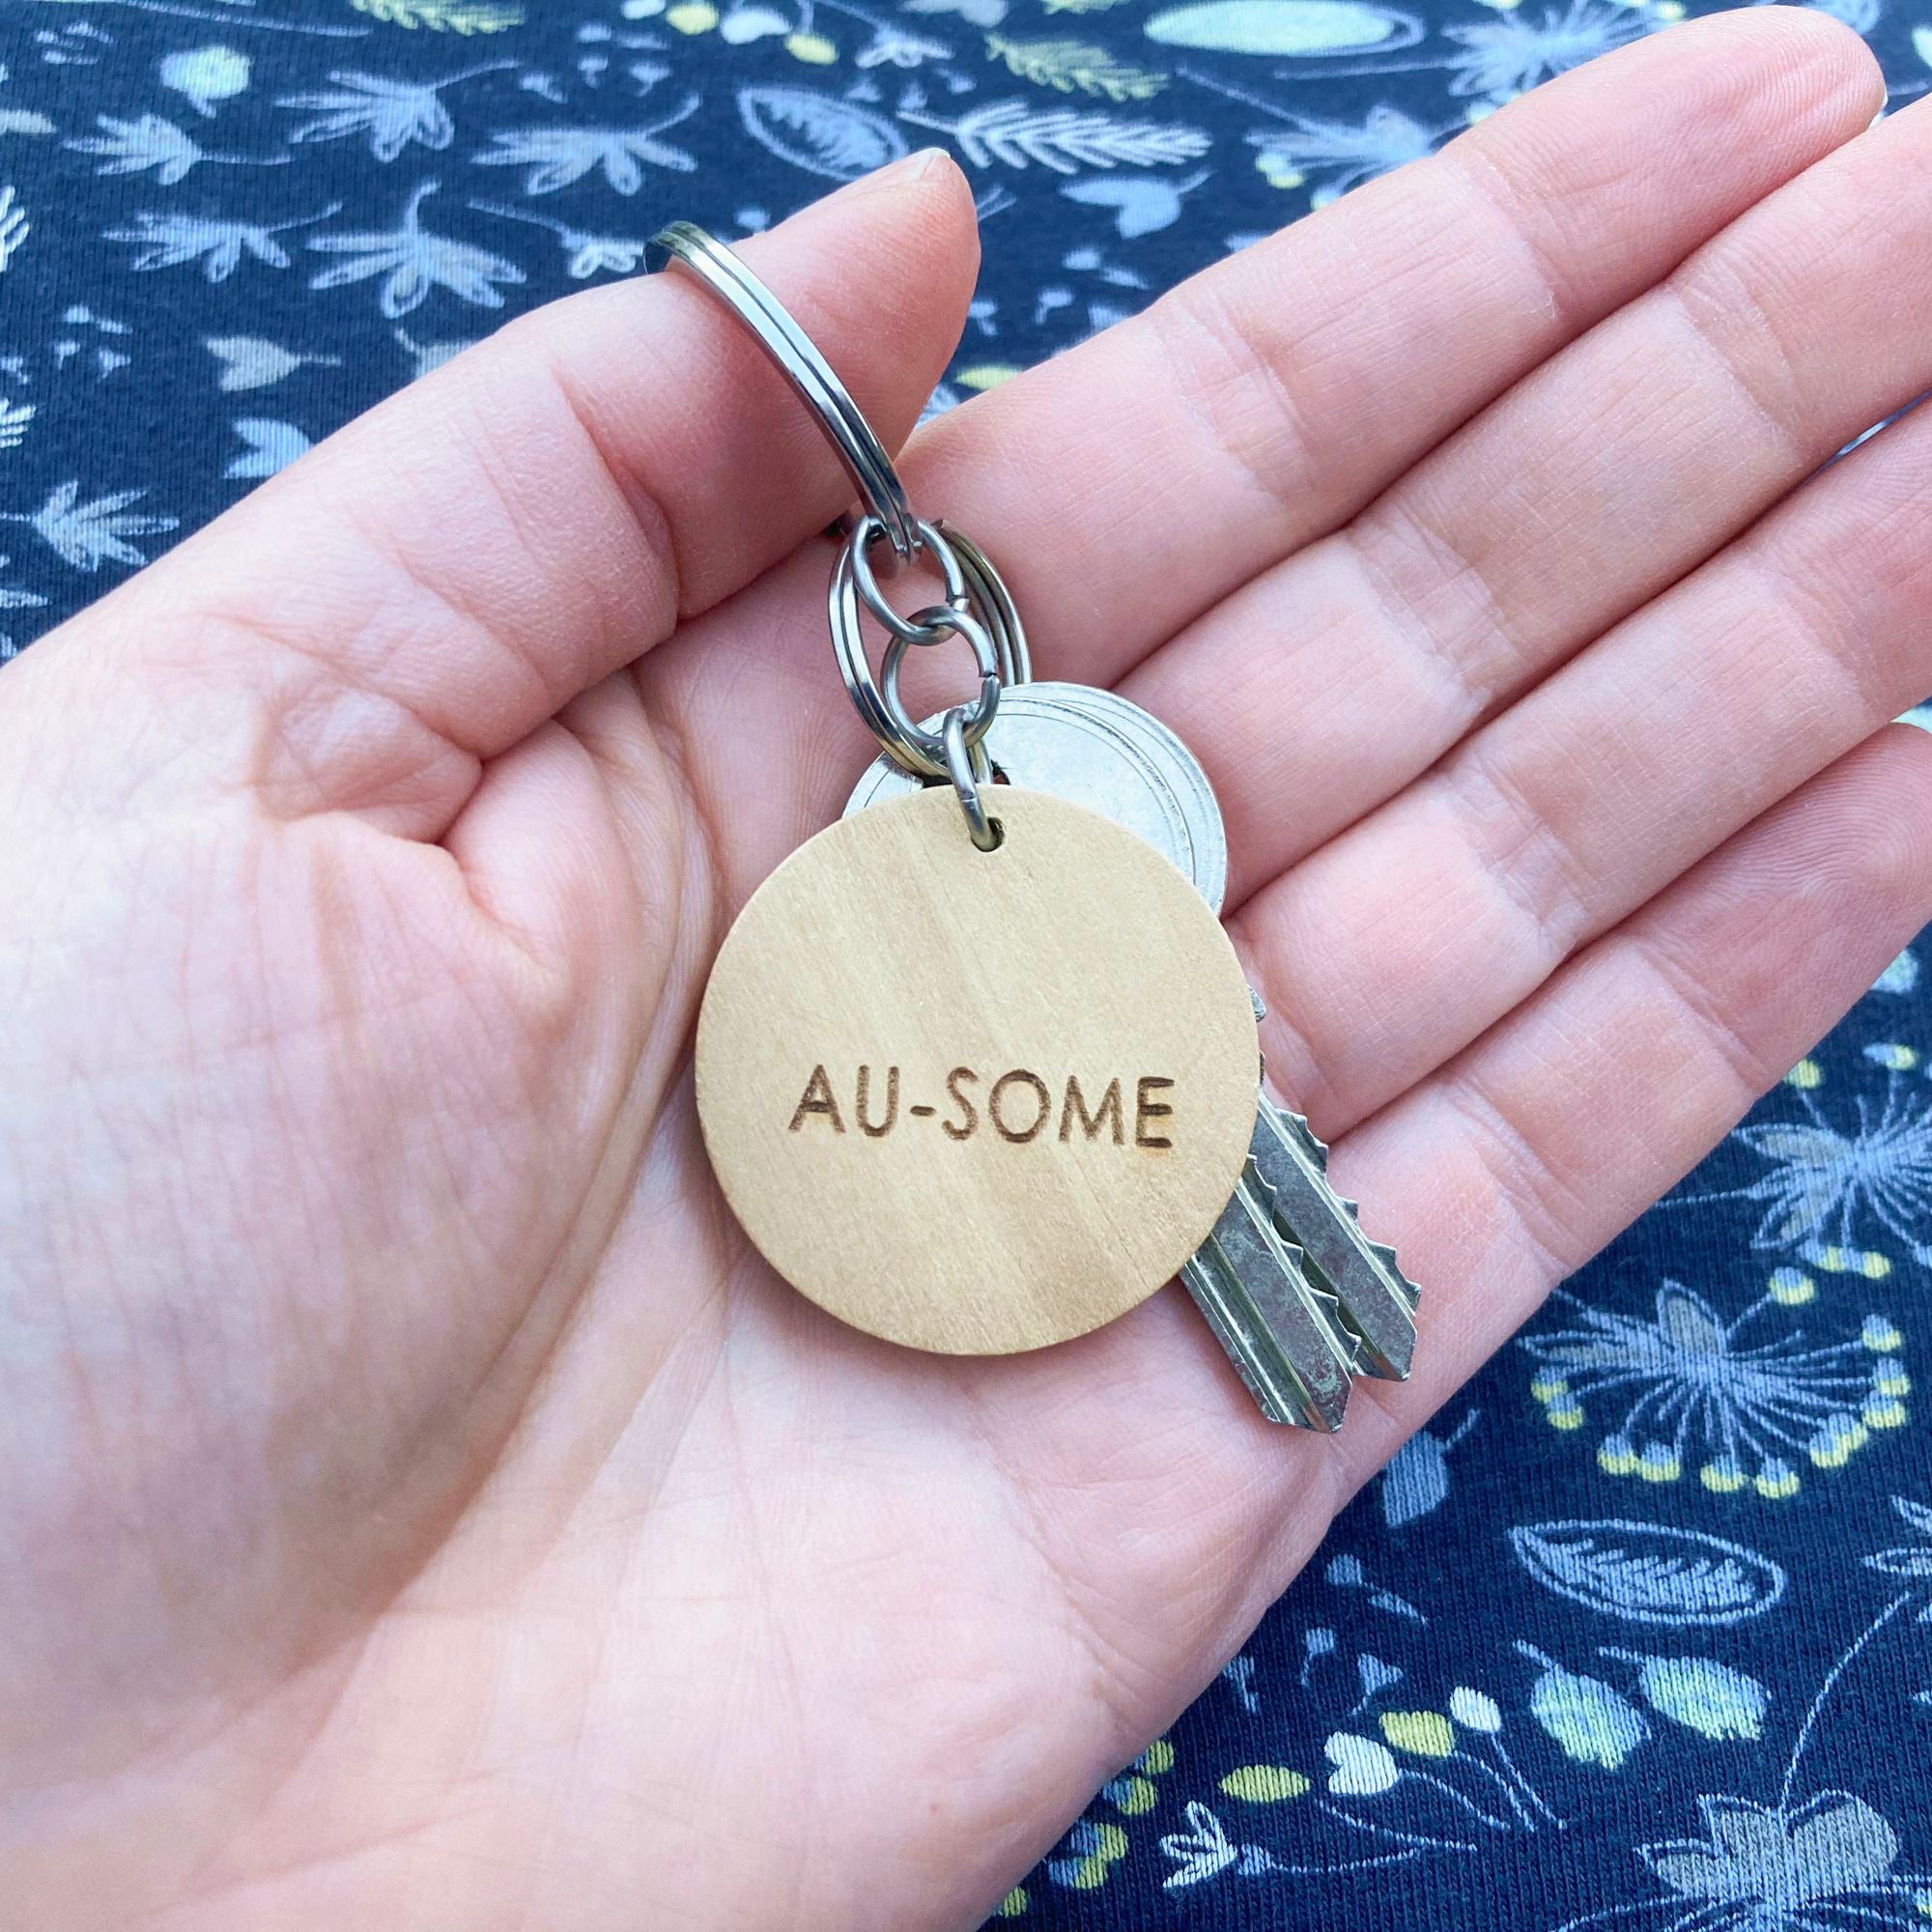 autism keyring present for autistic person uk